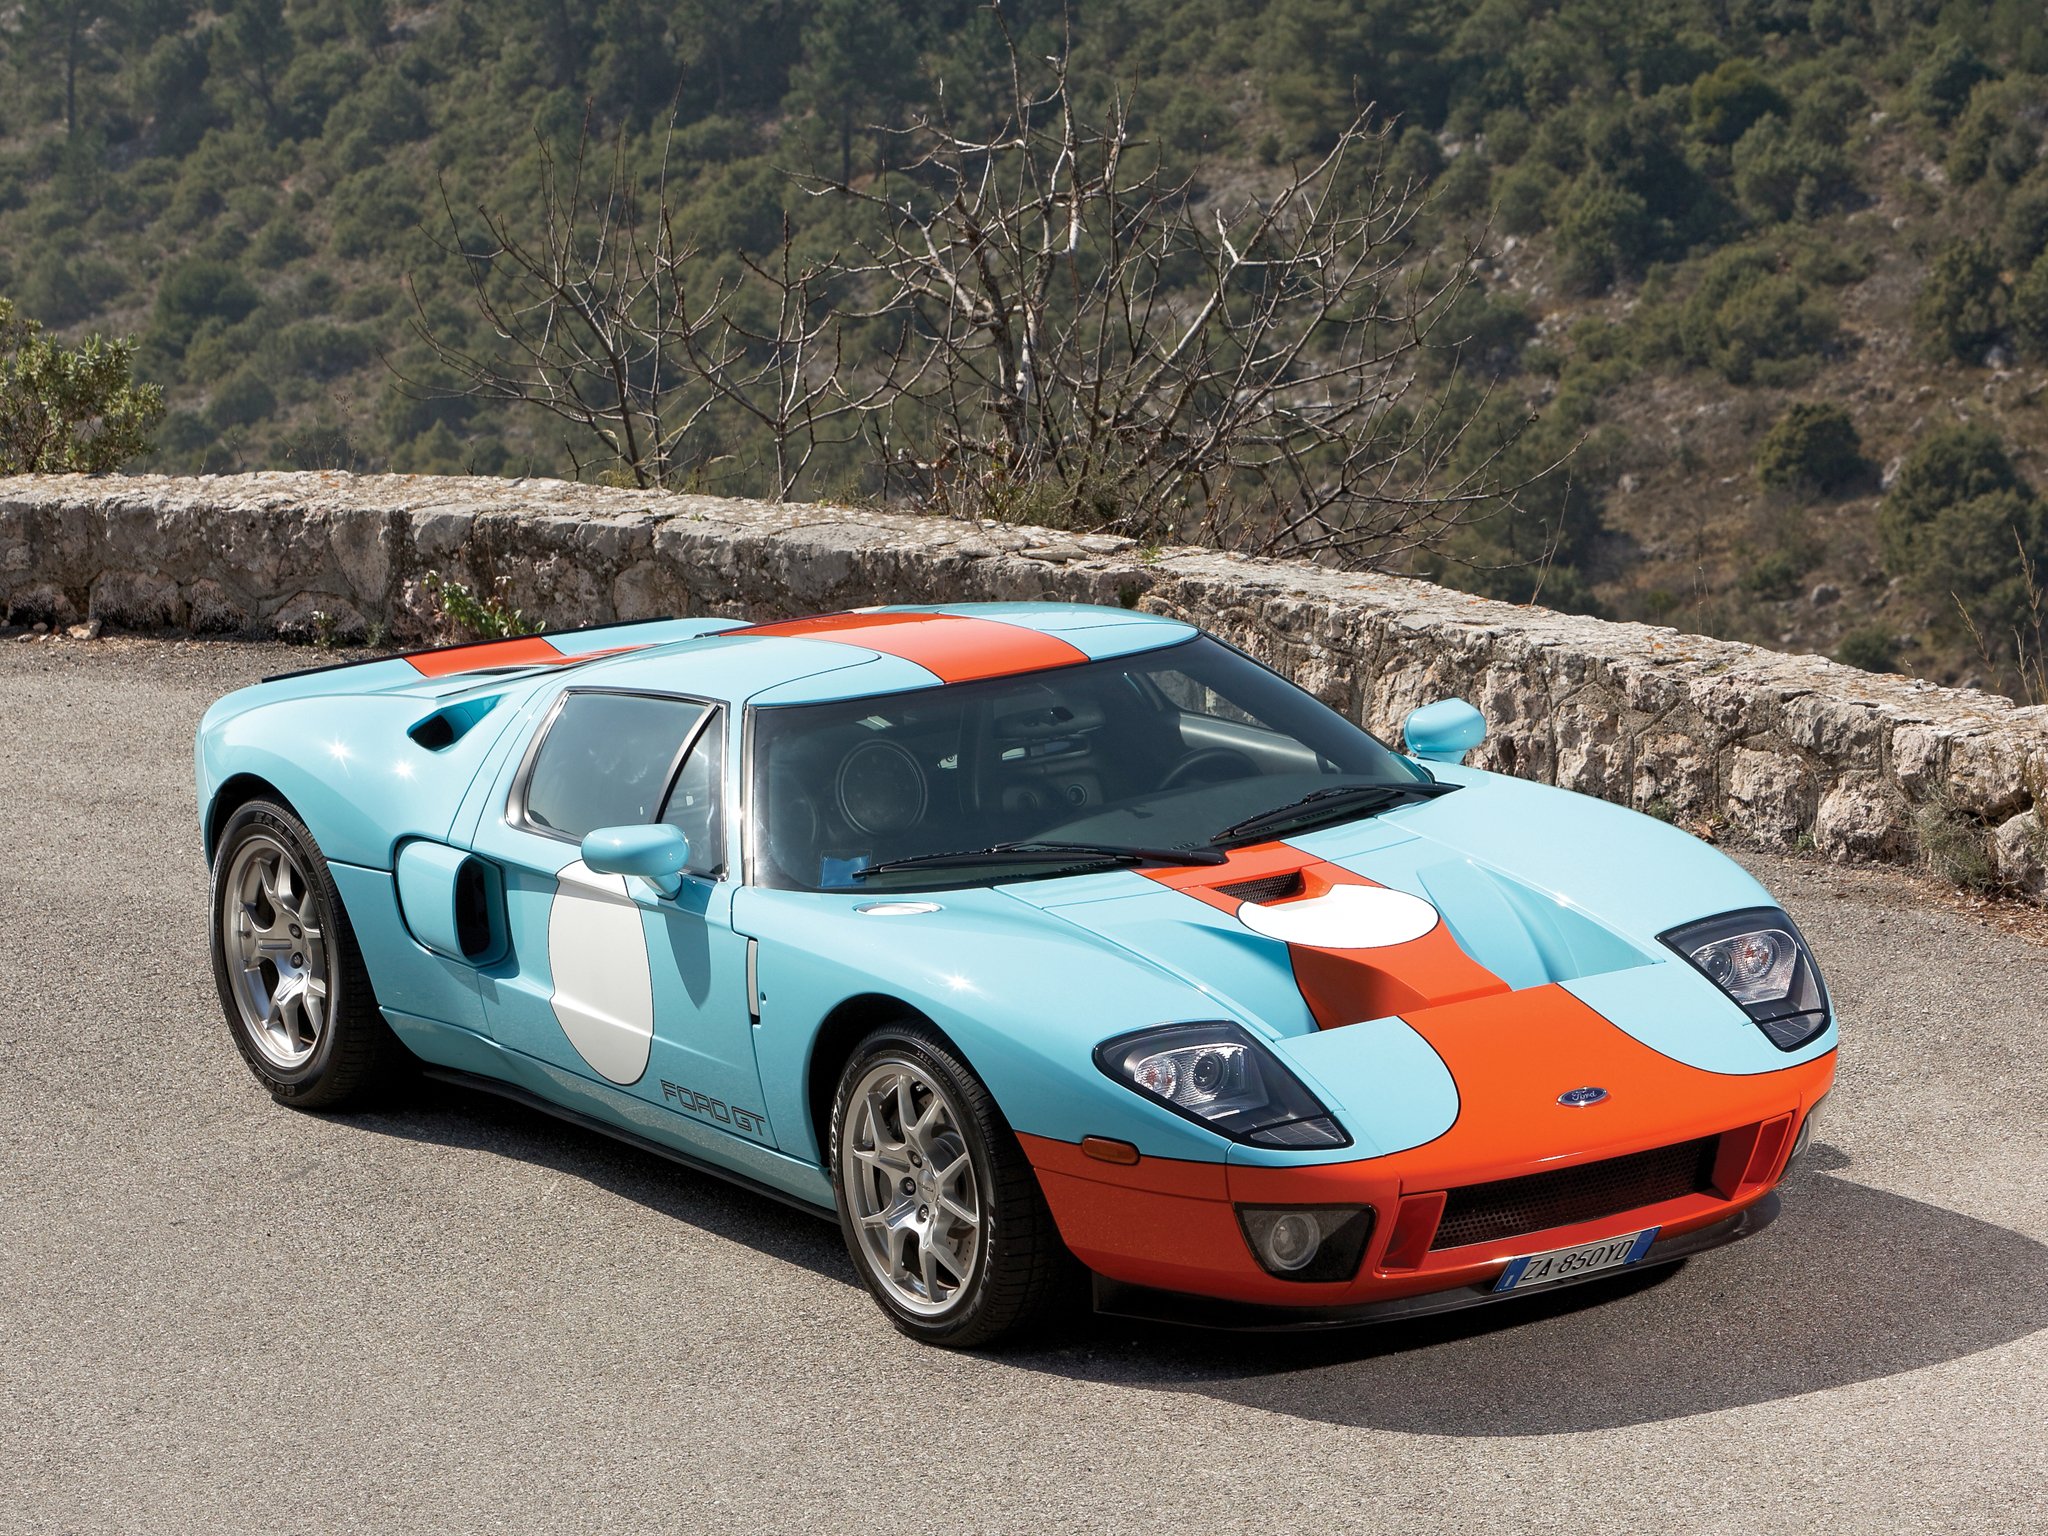 2006, Ford, G t, Heritage, Supercar, Race, Racing Wallpaper